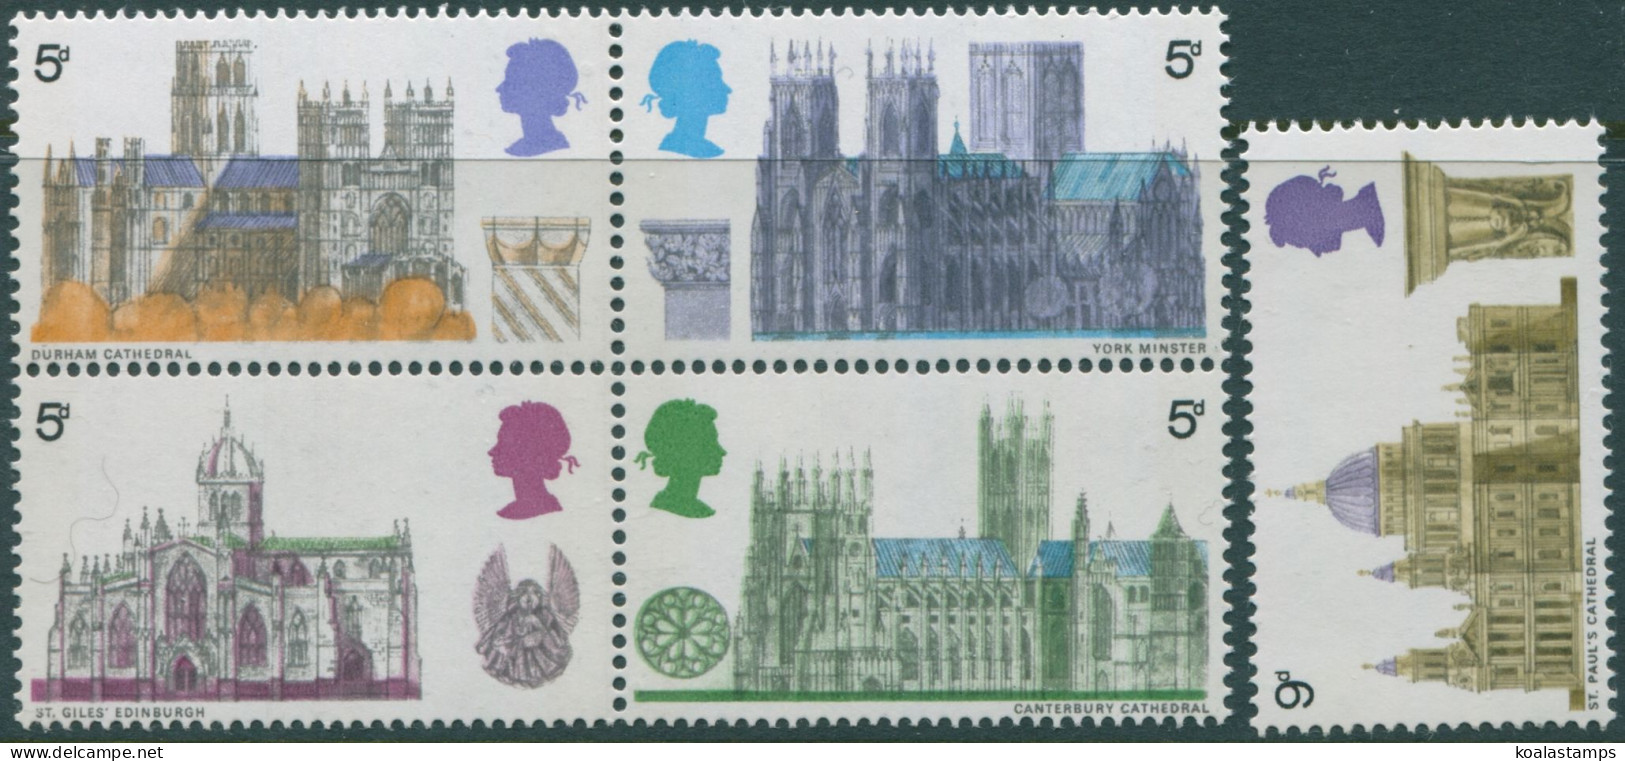 Great Britain 1969 SG796-801 QEII Cathedrals Block Set MNH - Unclassified